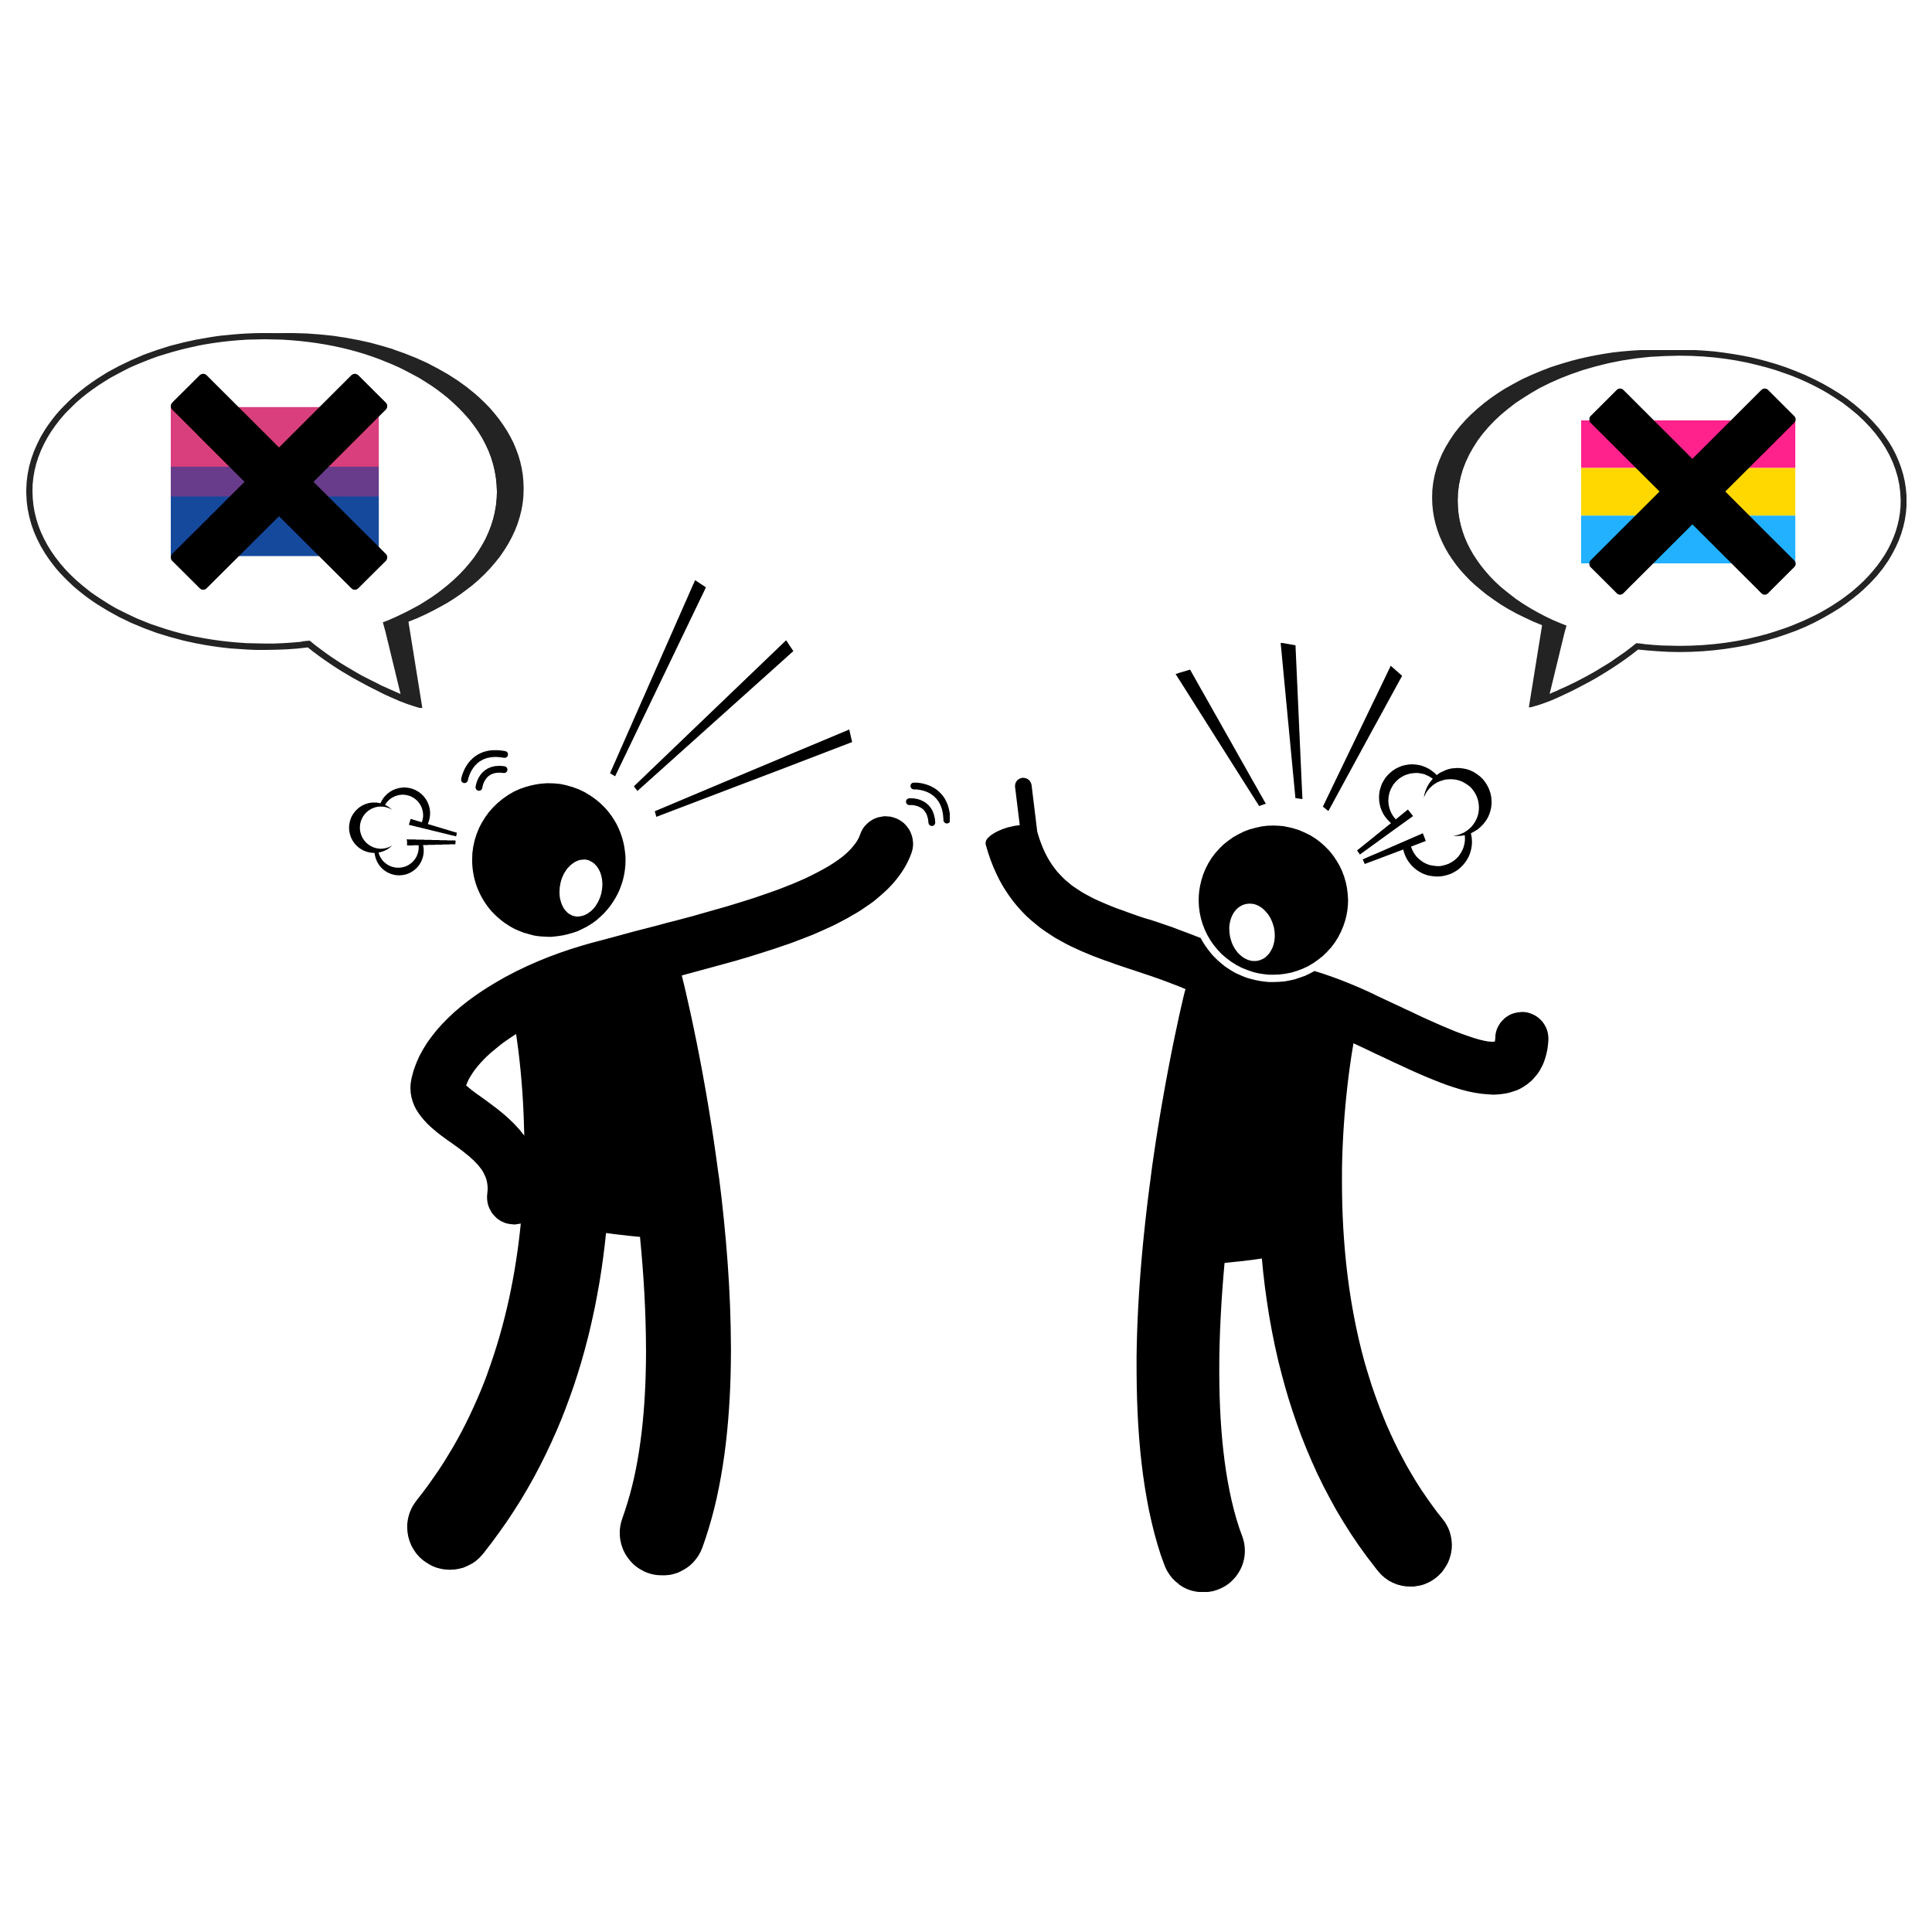 A cartoon image of a bisexual person and a pansexual person arguing with each other